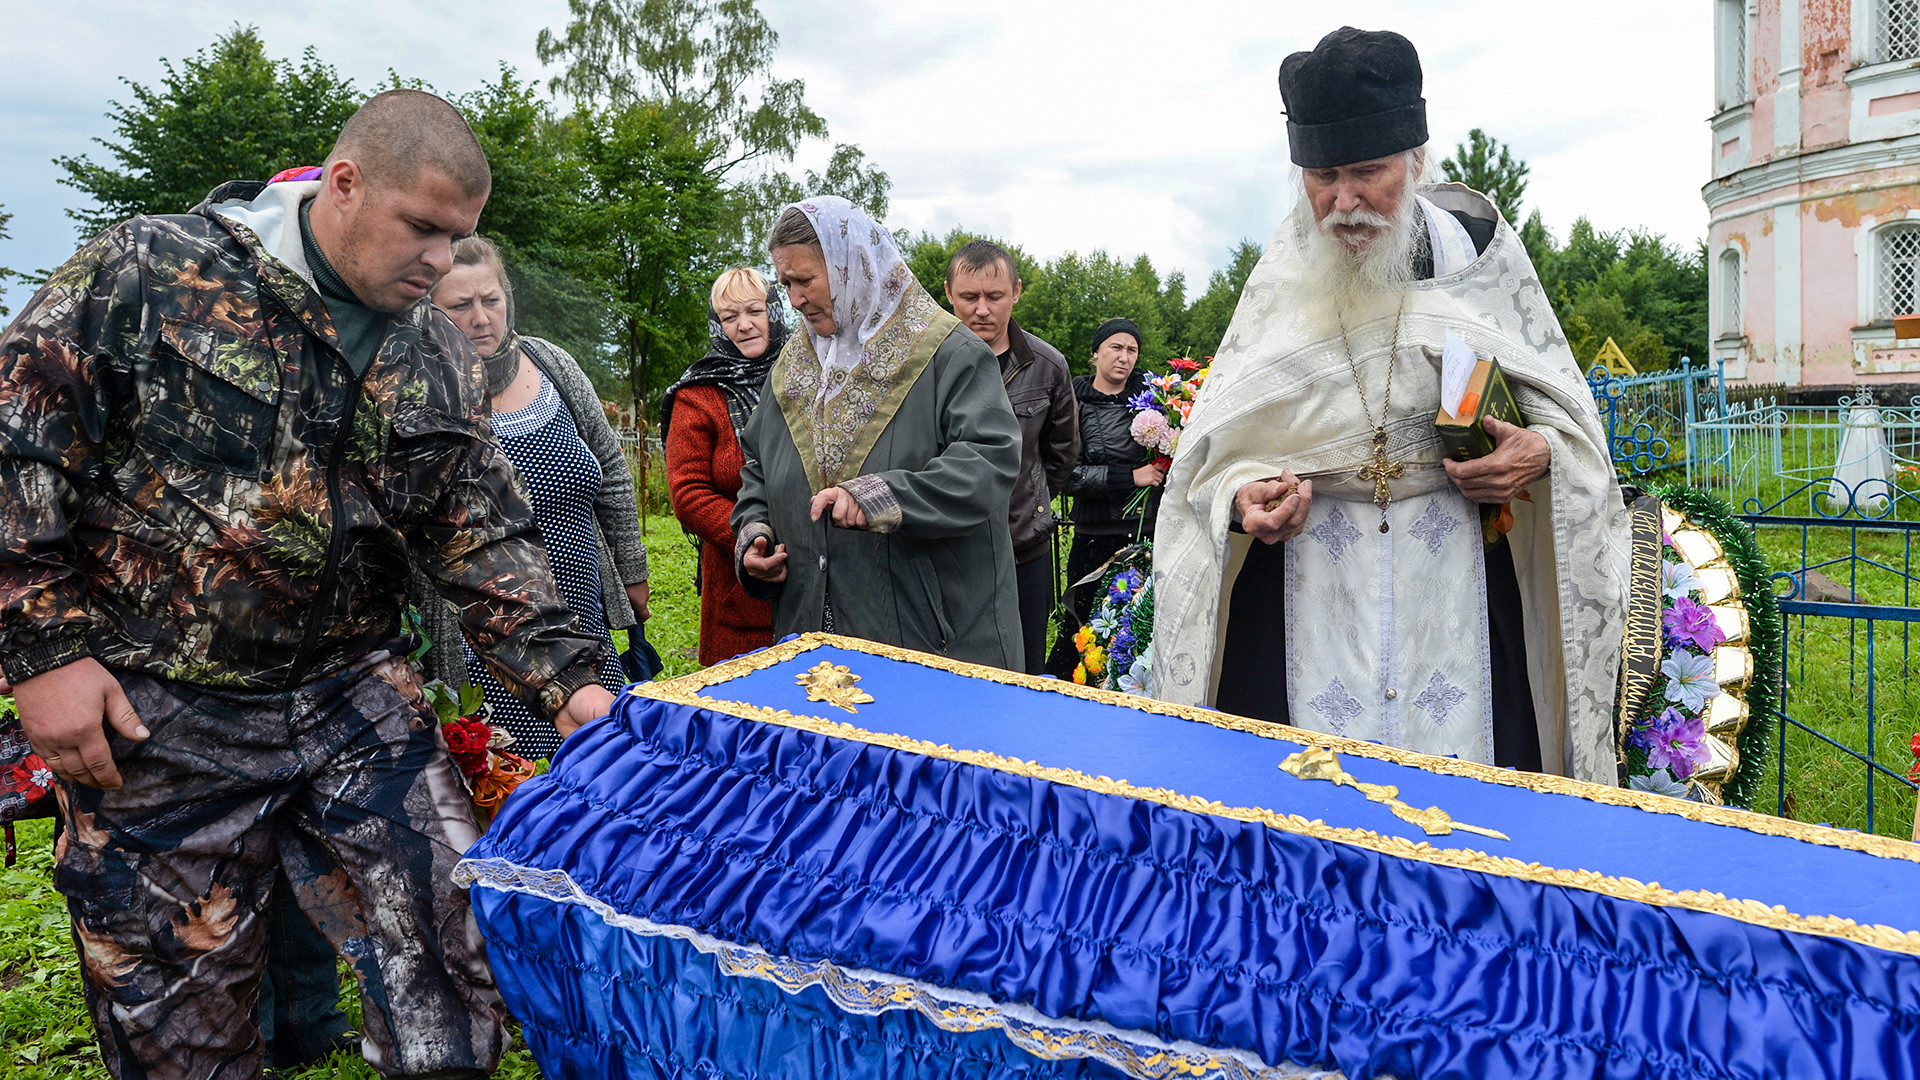 Father Sergiy, a priest and presbyter of St. Flor and St. Lavr Church in Florovskoye, Yaroslavl Region, during a funeral service at the cemetery.